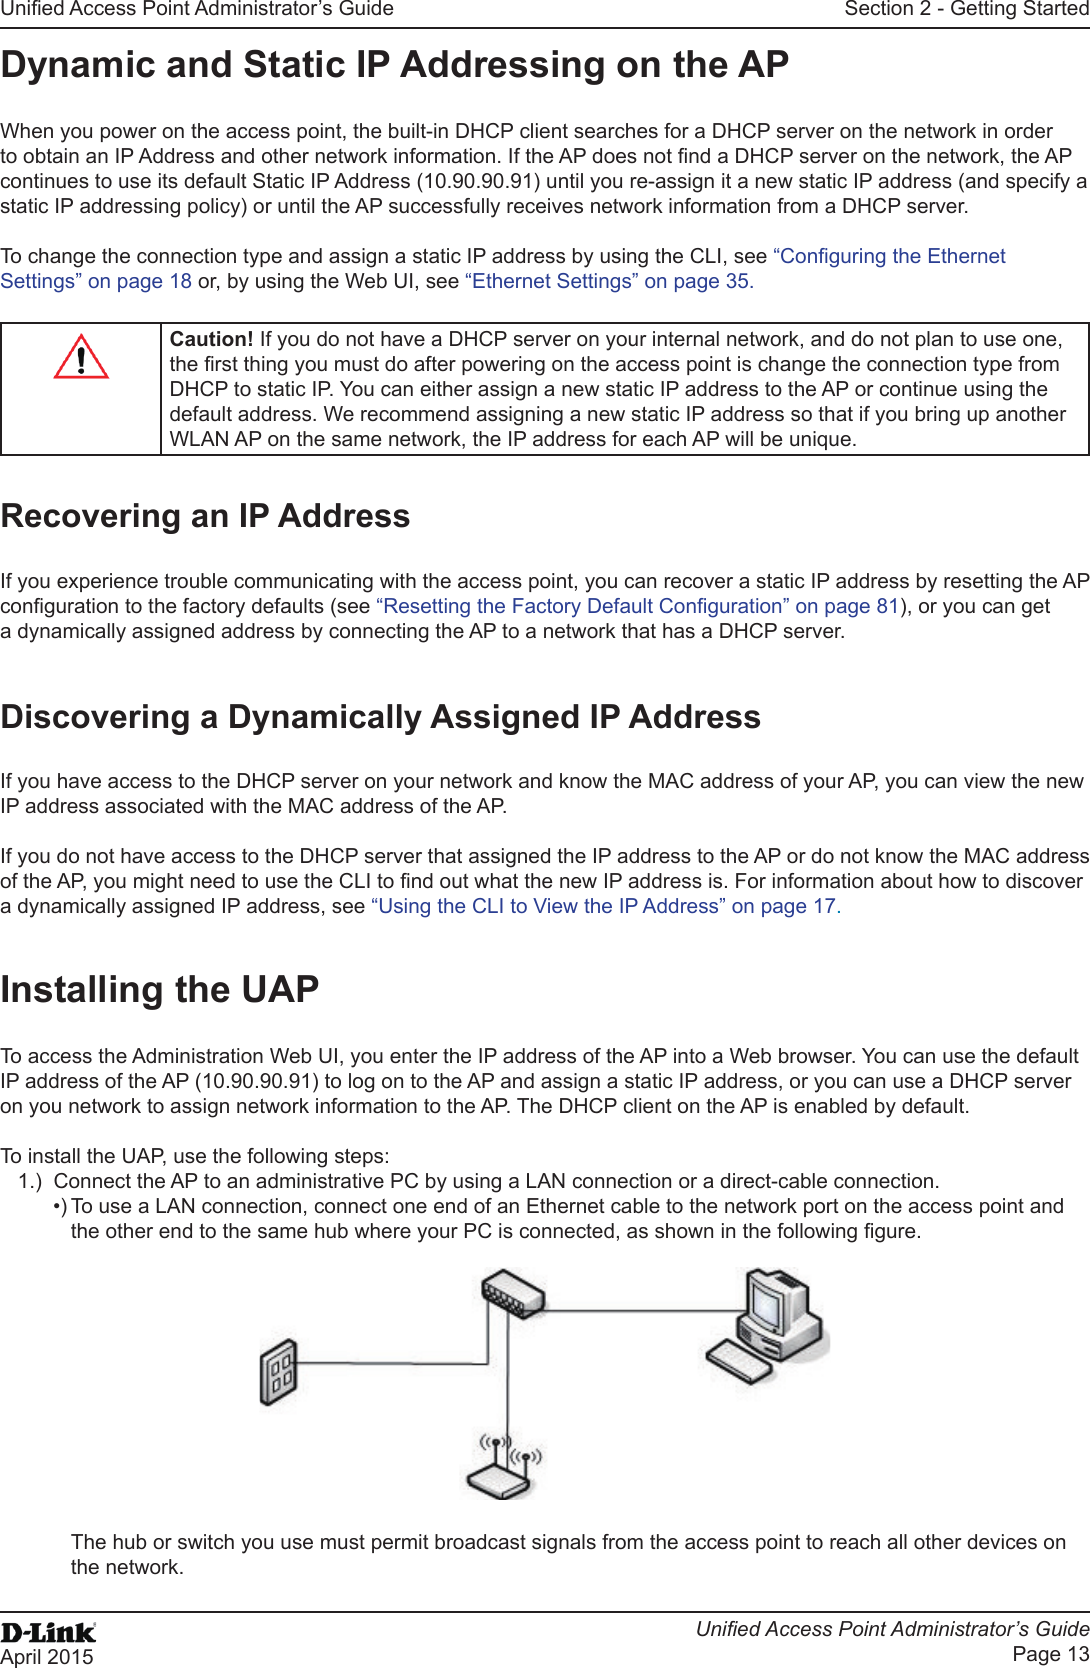 Unied Access Point Administrator’s GuideUnied Access Point Administrator’s GuidePage 13April 2015Section 2 - Getting StartedDynamic and Static IP Addressing on the APWhen you power on the access point, the built-in DHCP client searches for a DHCP server on the network in order to obtain an IP Address and other network information. If the AP does not nd a DHCP server on the network, the AP continues to use its default Static IP Address (10.90.90.91) until you re-assign it a new static IP address (and specify a static IP addressing policy) or until the AP successfully receives network information from a DHCP server.To change the connection type and assign a static IP address by using the CLI, see “Conguring the Ethernet Settings” on page 18 or, by using the Web UI, see “Ethernet Settings” on page 35.Caution! If you do not have a DHCP server on your internal network, and do not plan to use one, the rst thing you must do after powering on the access point is change the connection type from DHCP to static IP. You can either assign a new static IP address to the AP or continue using the default address. We recommend assigning a new static IP address so that if you bring up another WLAN AP on the same network, the IP address for each AP will be unique.Recovering an IP AddressIf you experience trouble communicating with the access point, you can recover a static IP address by resetting the AP conguration to the factory defaults (see “Resetting the Factory Default Conguration” on page 81), or you can get a dynamically assigned address by connecting the AP to a network that has a DHCP server.Discovering a Dynamically Assigned IP AddressIf you have access to the DHCP server on your network and know the MAC address of your AP, you can view the new IP address associated with the MAC address of the AP. If you do not have access to the DHCP server that assigned the IP address to the AP or do not know the MAC address of the AP, you might need to use the CLI to nd out what the new IP address is. For information about how to discover a dynamically assigned IP address, see “Using the CLI to View the IP Address” on page 17.Installing the UAPTo access the Administration Web UI, you enter the IP address of the AP into a Web browser. You can use the default IP address of the AP (10.90.90.91) to log on to the AP and assign a static IP address, or you can use a DHCP server on you network to assign network information to the AP. The DHCP client on the AP is enabled by default.To install the UAP, use the following steps:1.)  Connect the AP to an administrative PC by using a LAN connection or a direct-cable connection. •) To use a LAN connection, connect one end of an Ethernet cable to the network port on the access point and the other end to the same hub where your PC is connected, as shown in the following gure.The hub or switch you use must permit broadcast signals from the access point to reach all other devices on the network.